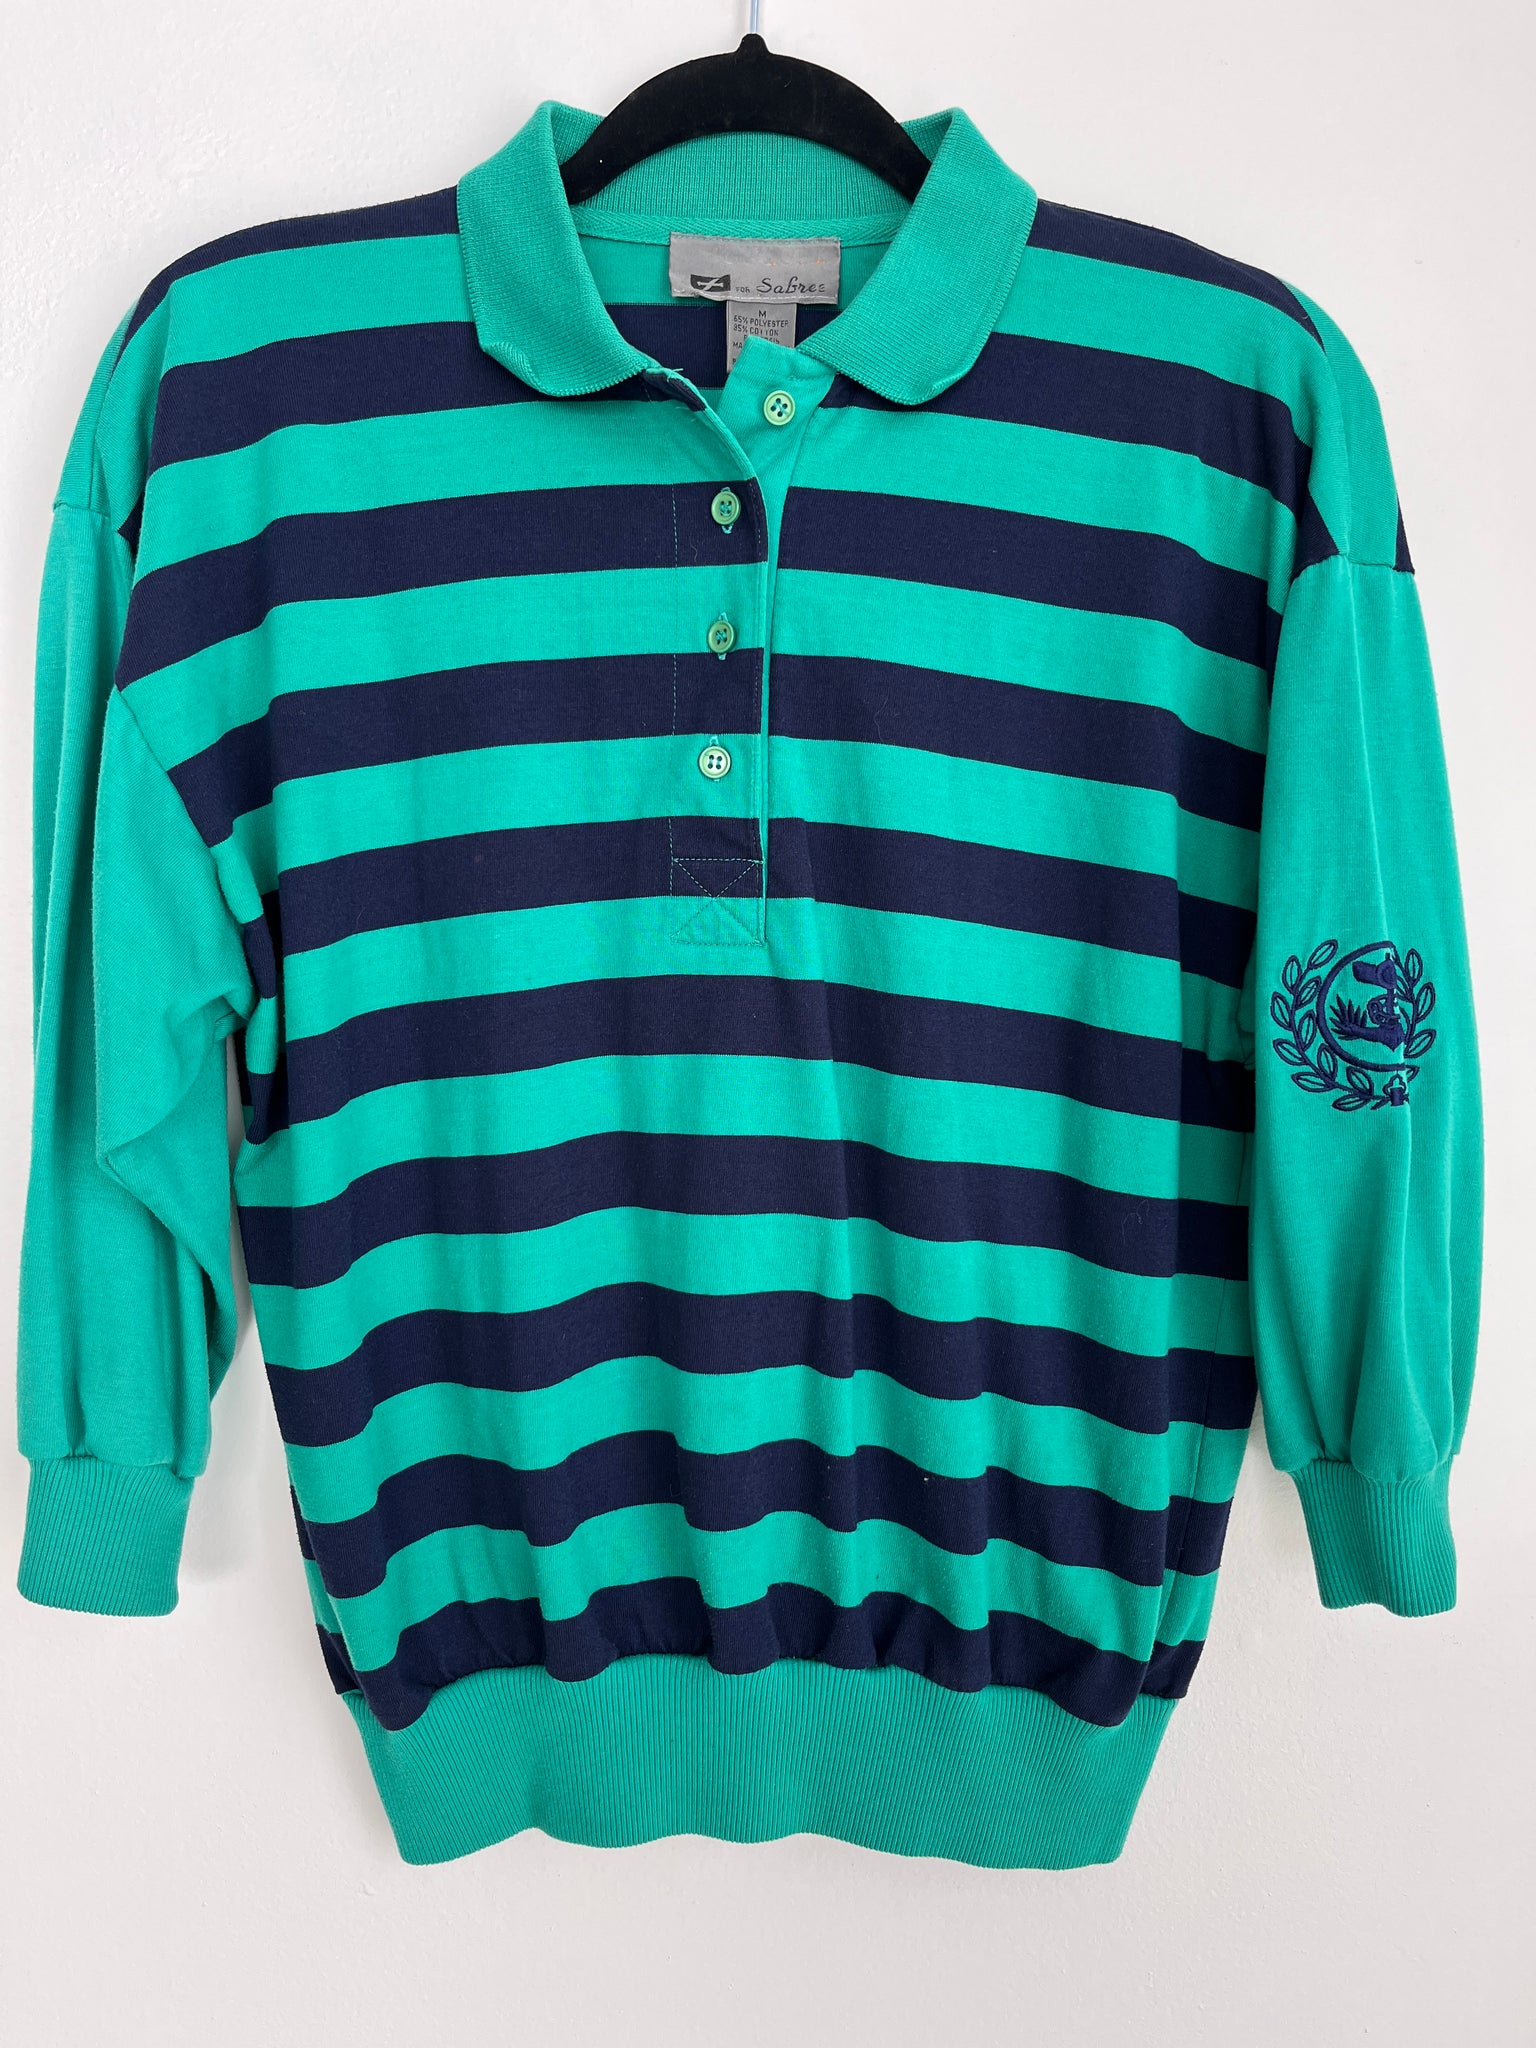 1990s TOP-Sabree banded striped polo blue/green